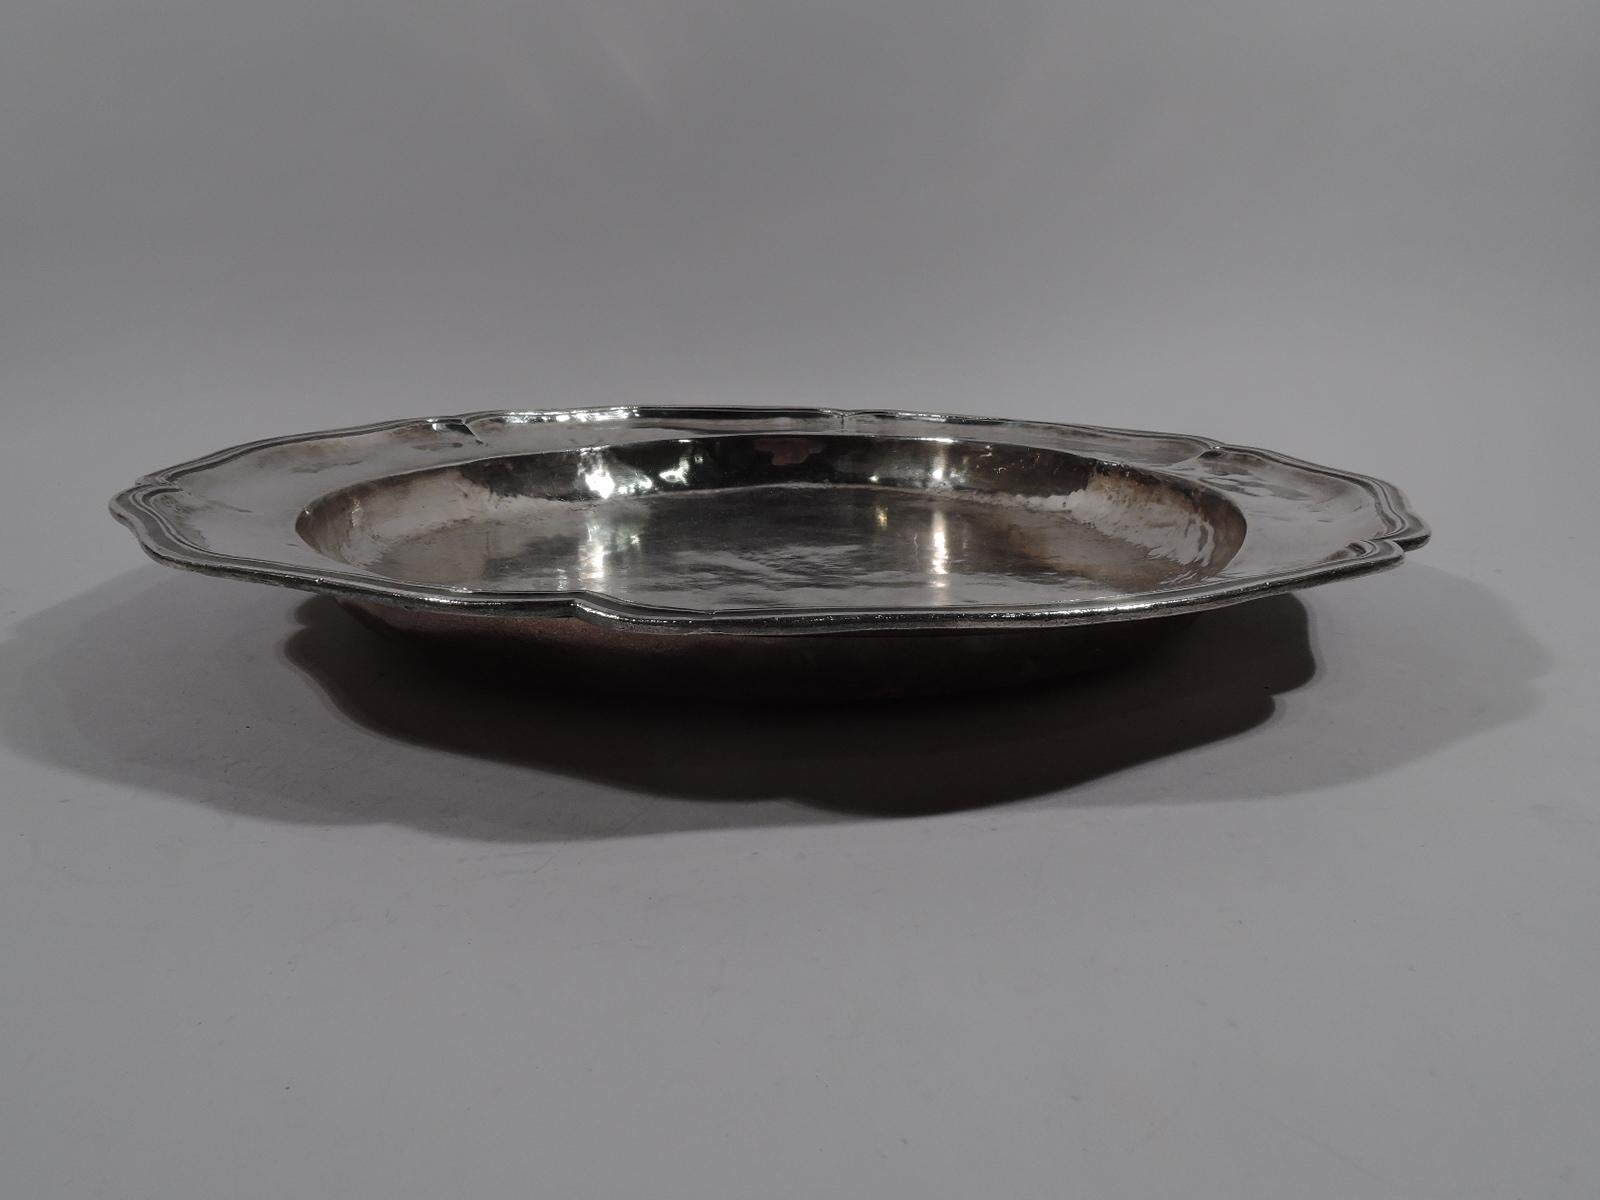 Large and heavy South American silver charger, late 18th-early 19th century. Round and deep well, wide shoulder, and molded, lobed, and scrolled rim. Visible handwork and tooling with attractive irregularities. Mass and heft. Marked. Weight: 55 troy